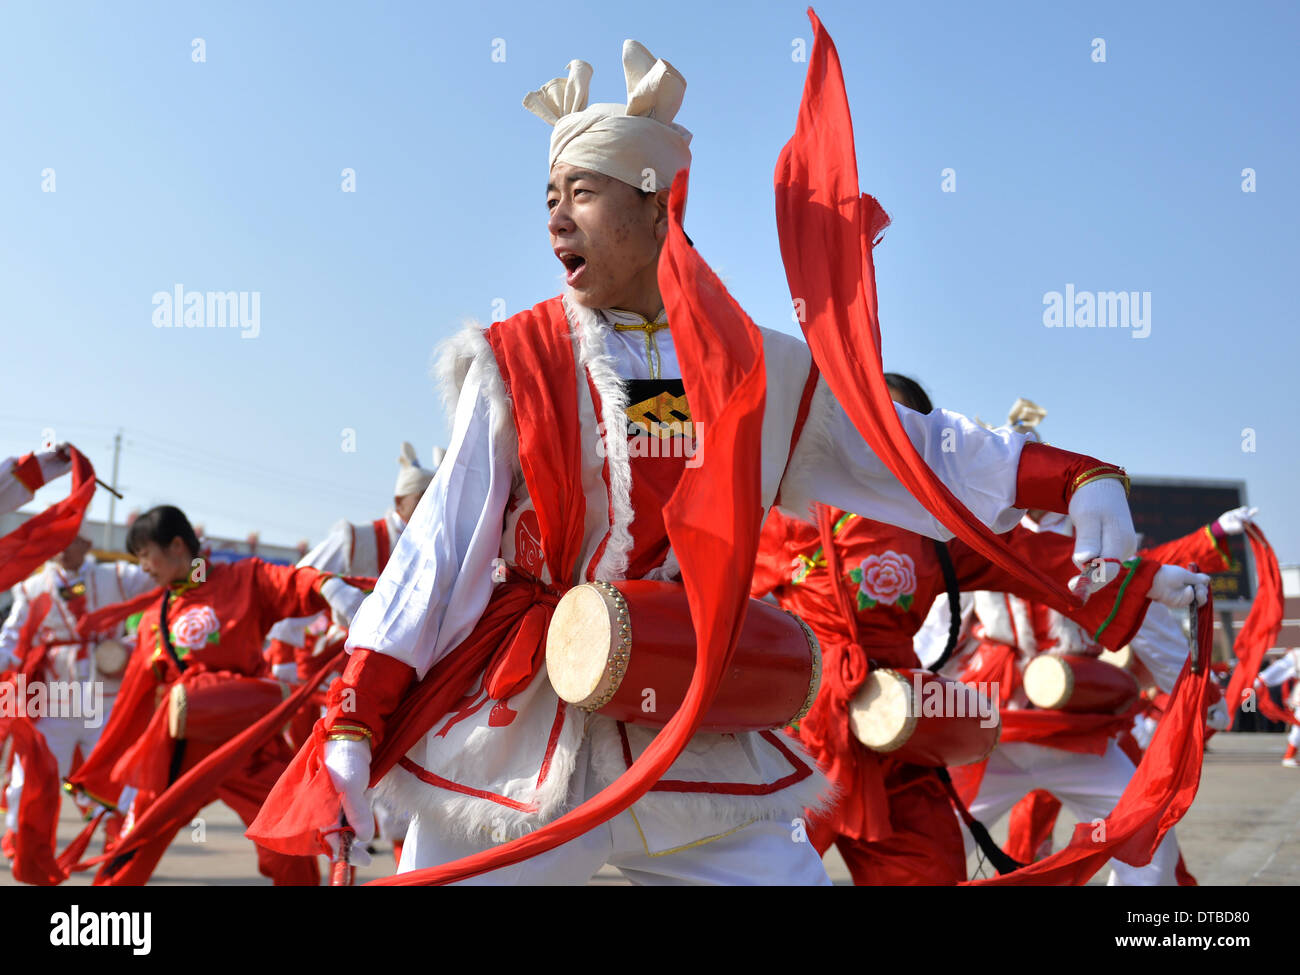 Hohhot, China's Inner Mongolia Autonomous Region. 14th Feb, 2014. People from Horinger County perform drum beating during a celebration in Hohhot, capital of north China's Inner Mongolia Autonomous Region, Feb. 14, 2014. People in Inner Mongolia held various celebrations for the Lantern Festival, which falls on the 15th day of the first month of the lunar calendar, or Feb. 14 this year. Credit:  Ren Junchuan/Xinhua/Alamy Live News Stock Photo